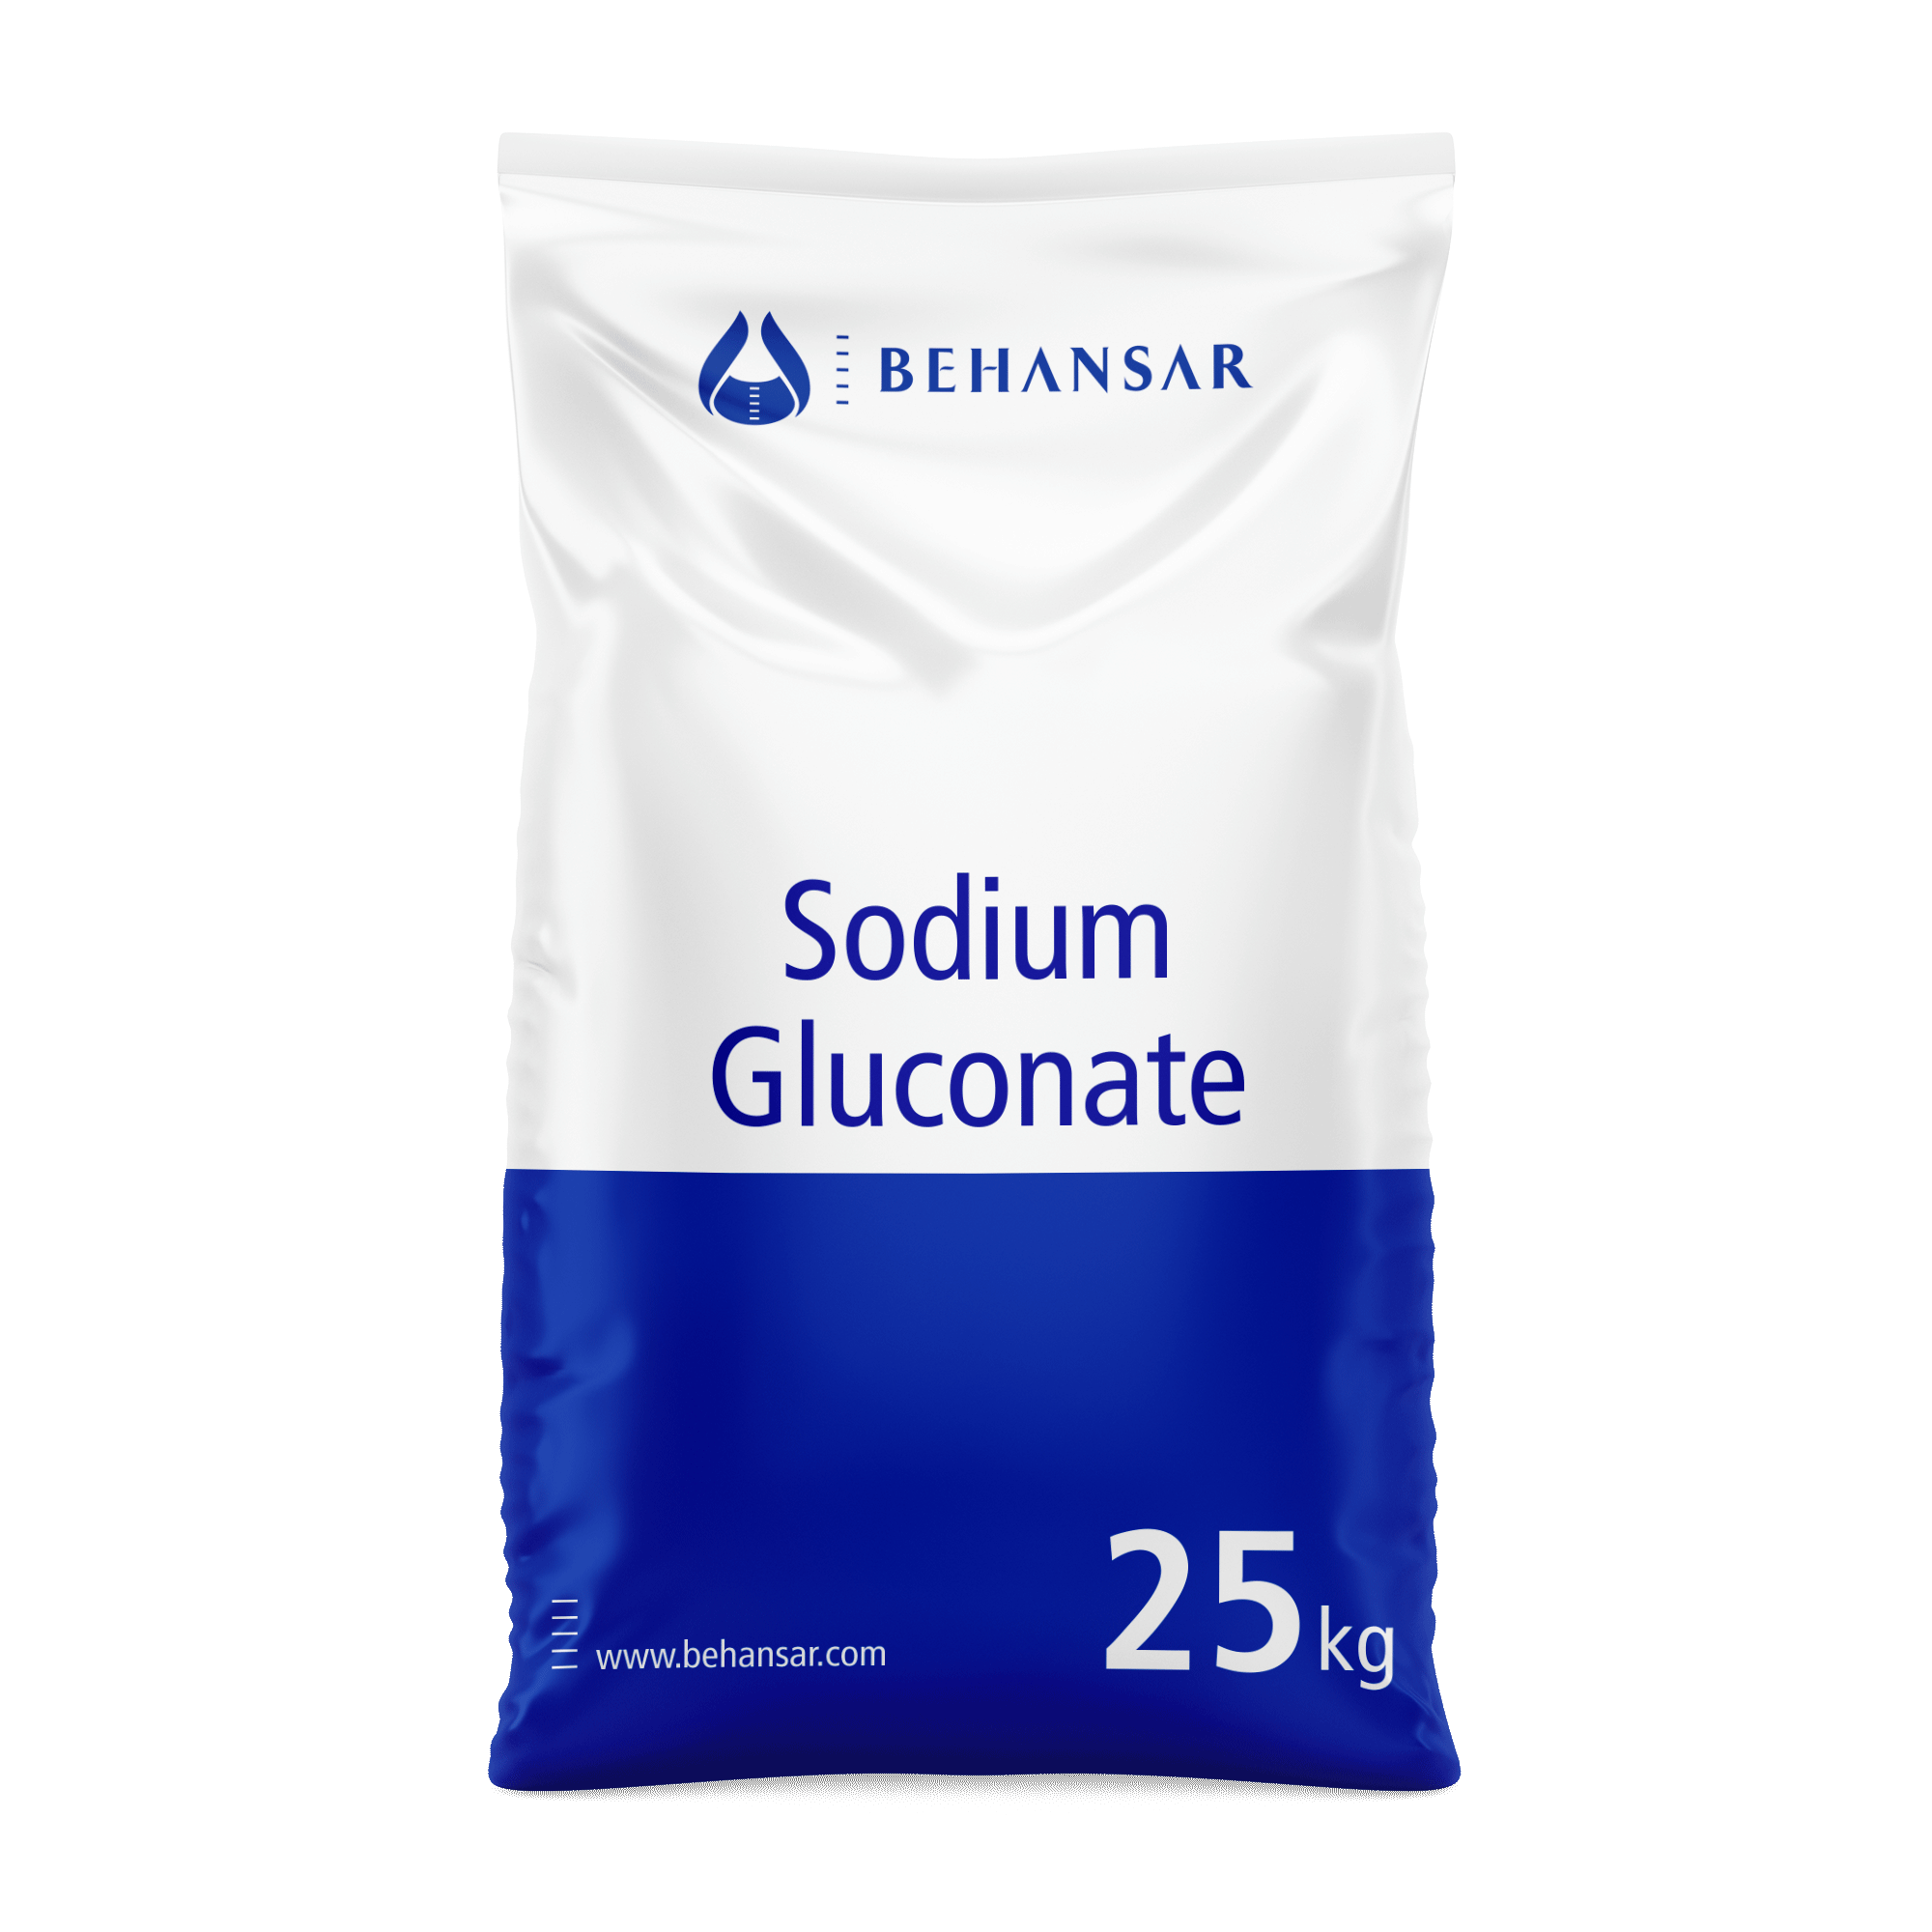 Sodium Gluconate is one of the products of Behansar Co